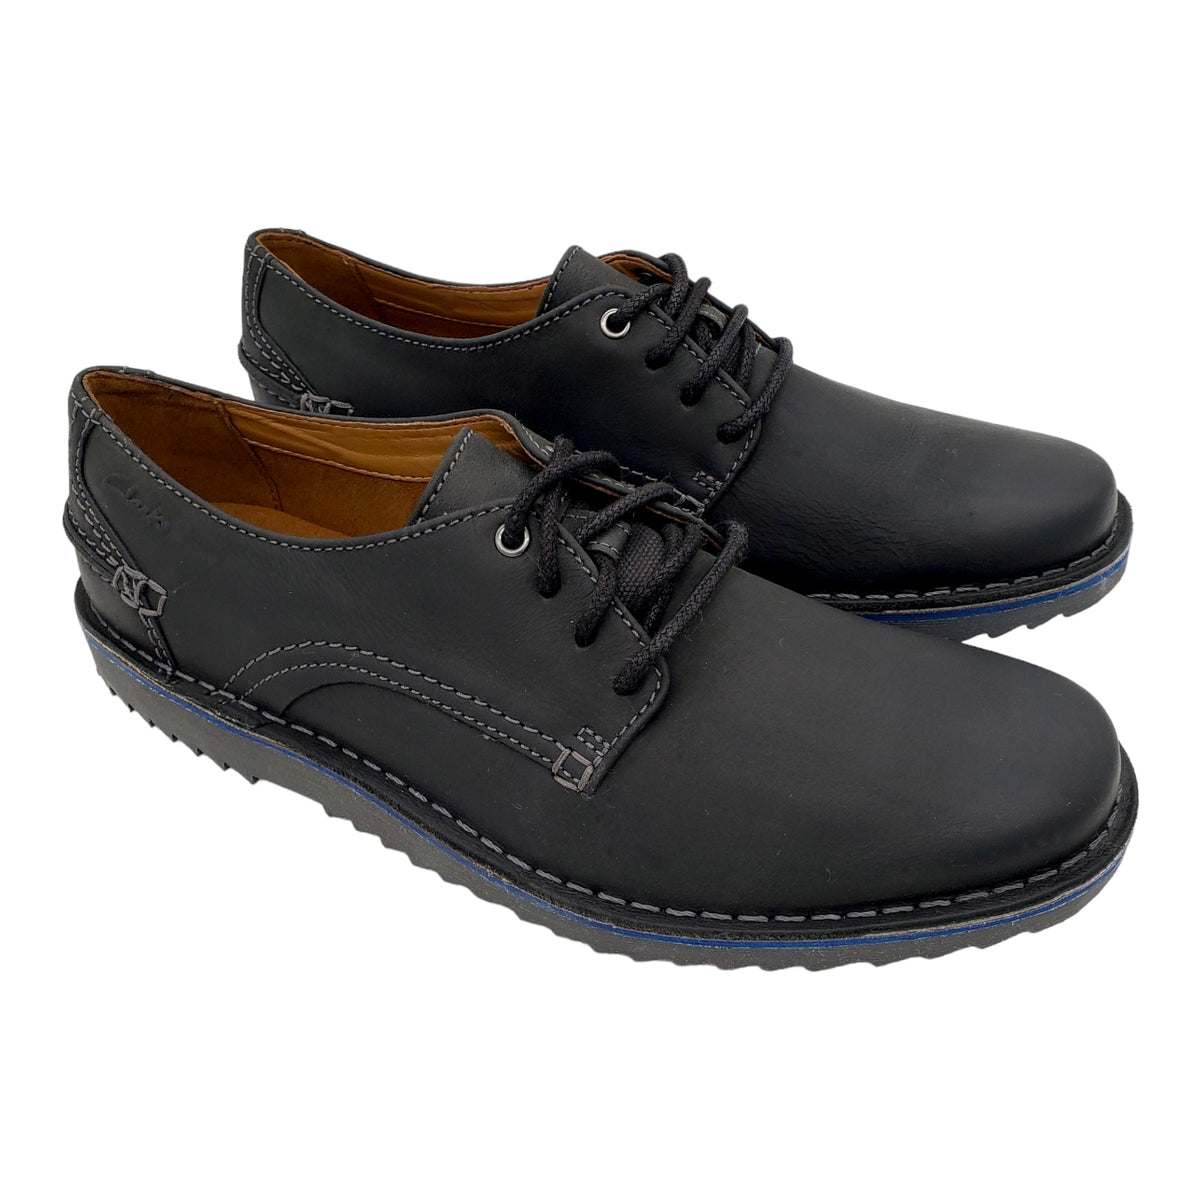 Clarks Black Leather Cushioned Shoes